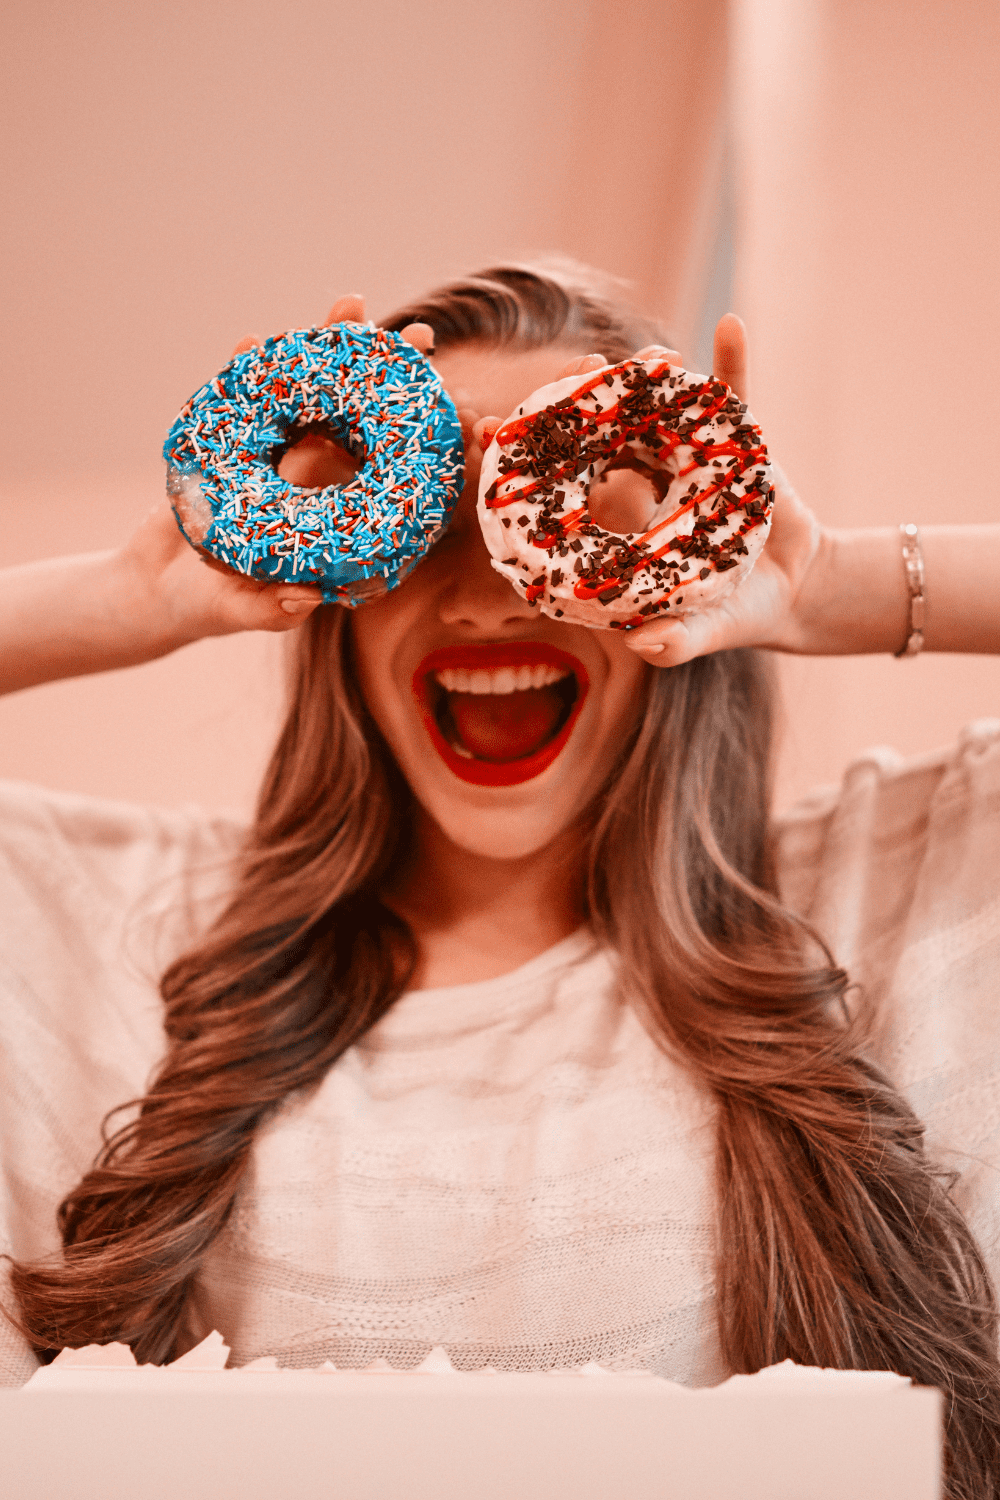 girl holding up donuts over her eyes